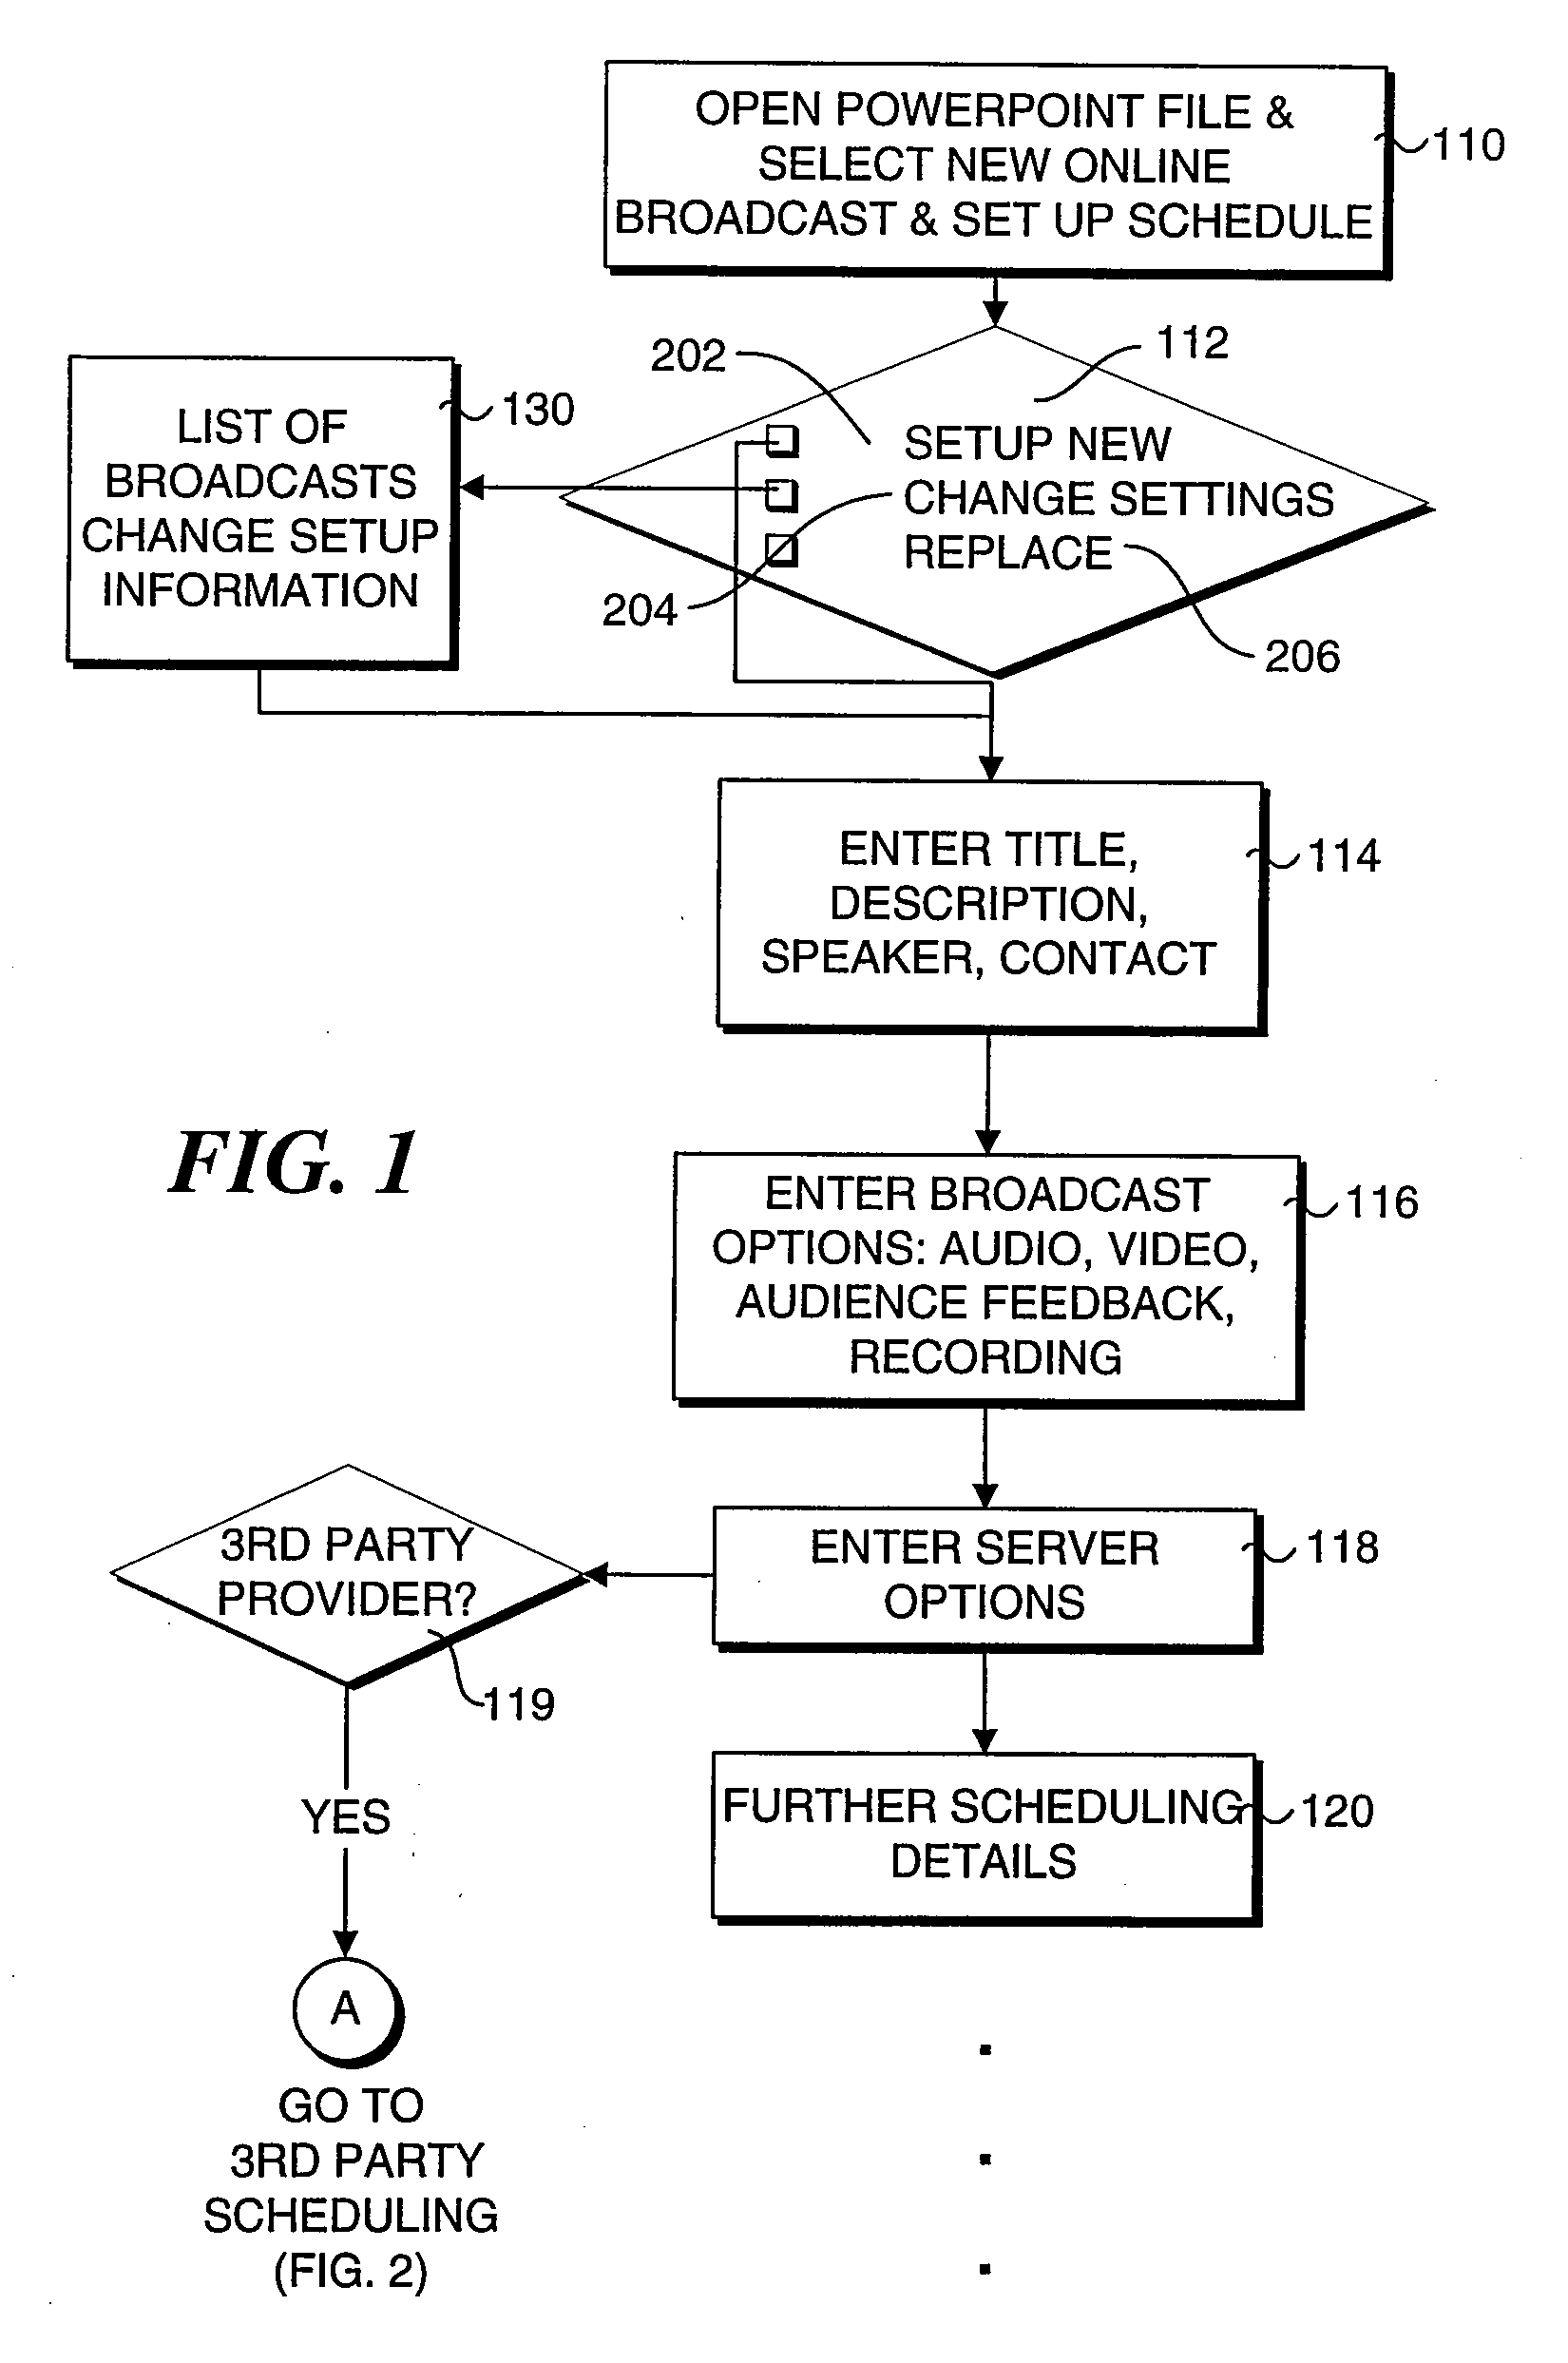 System and method for recording a presentation for on-demand viewing over a computer network